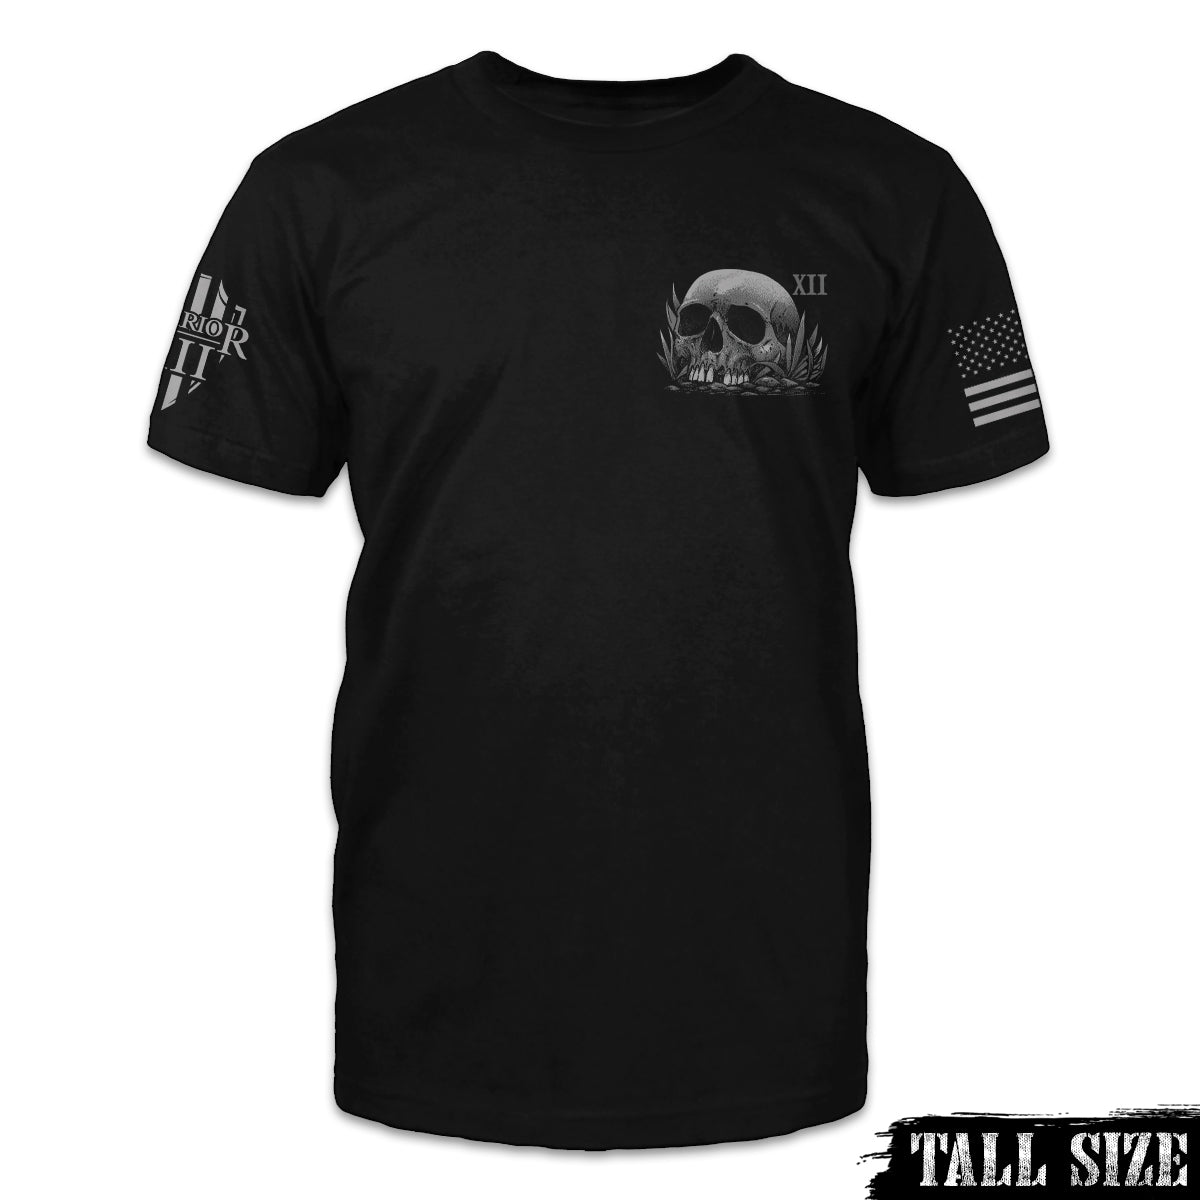 A black tall size shirt with a skull printed on the front.